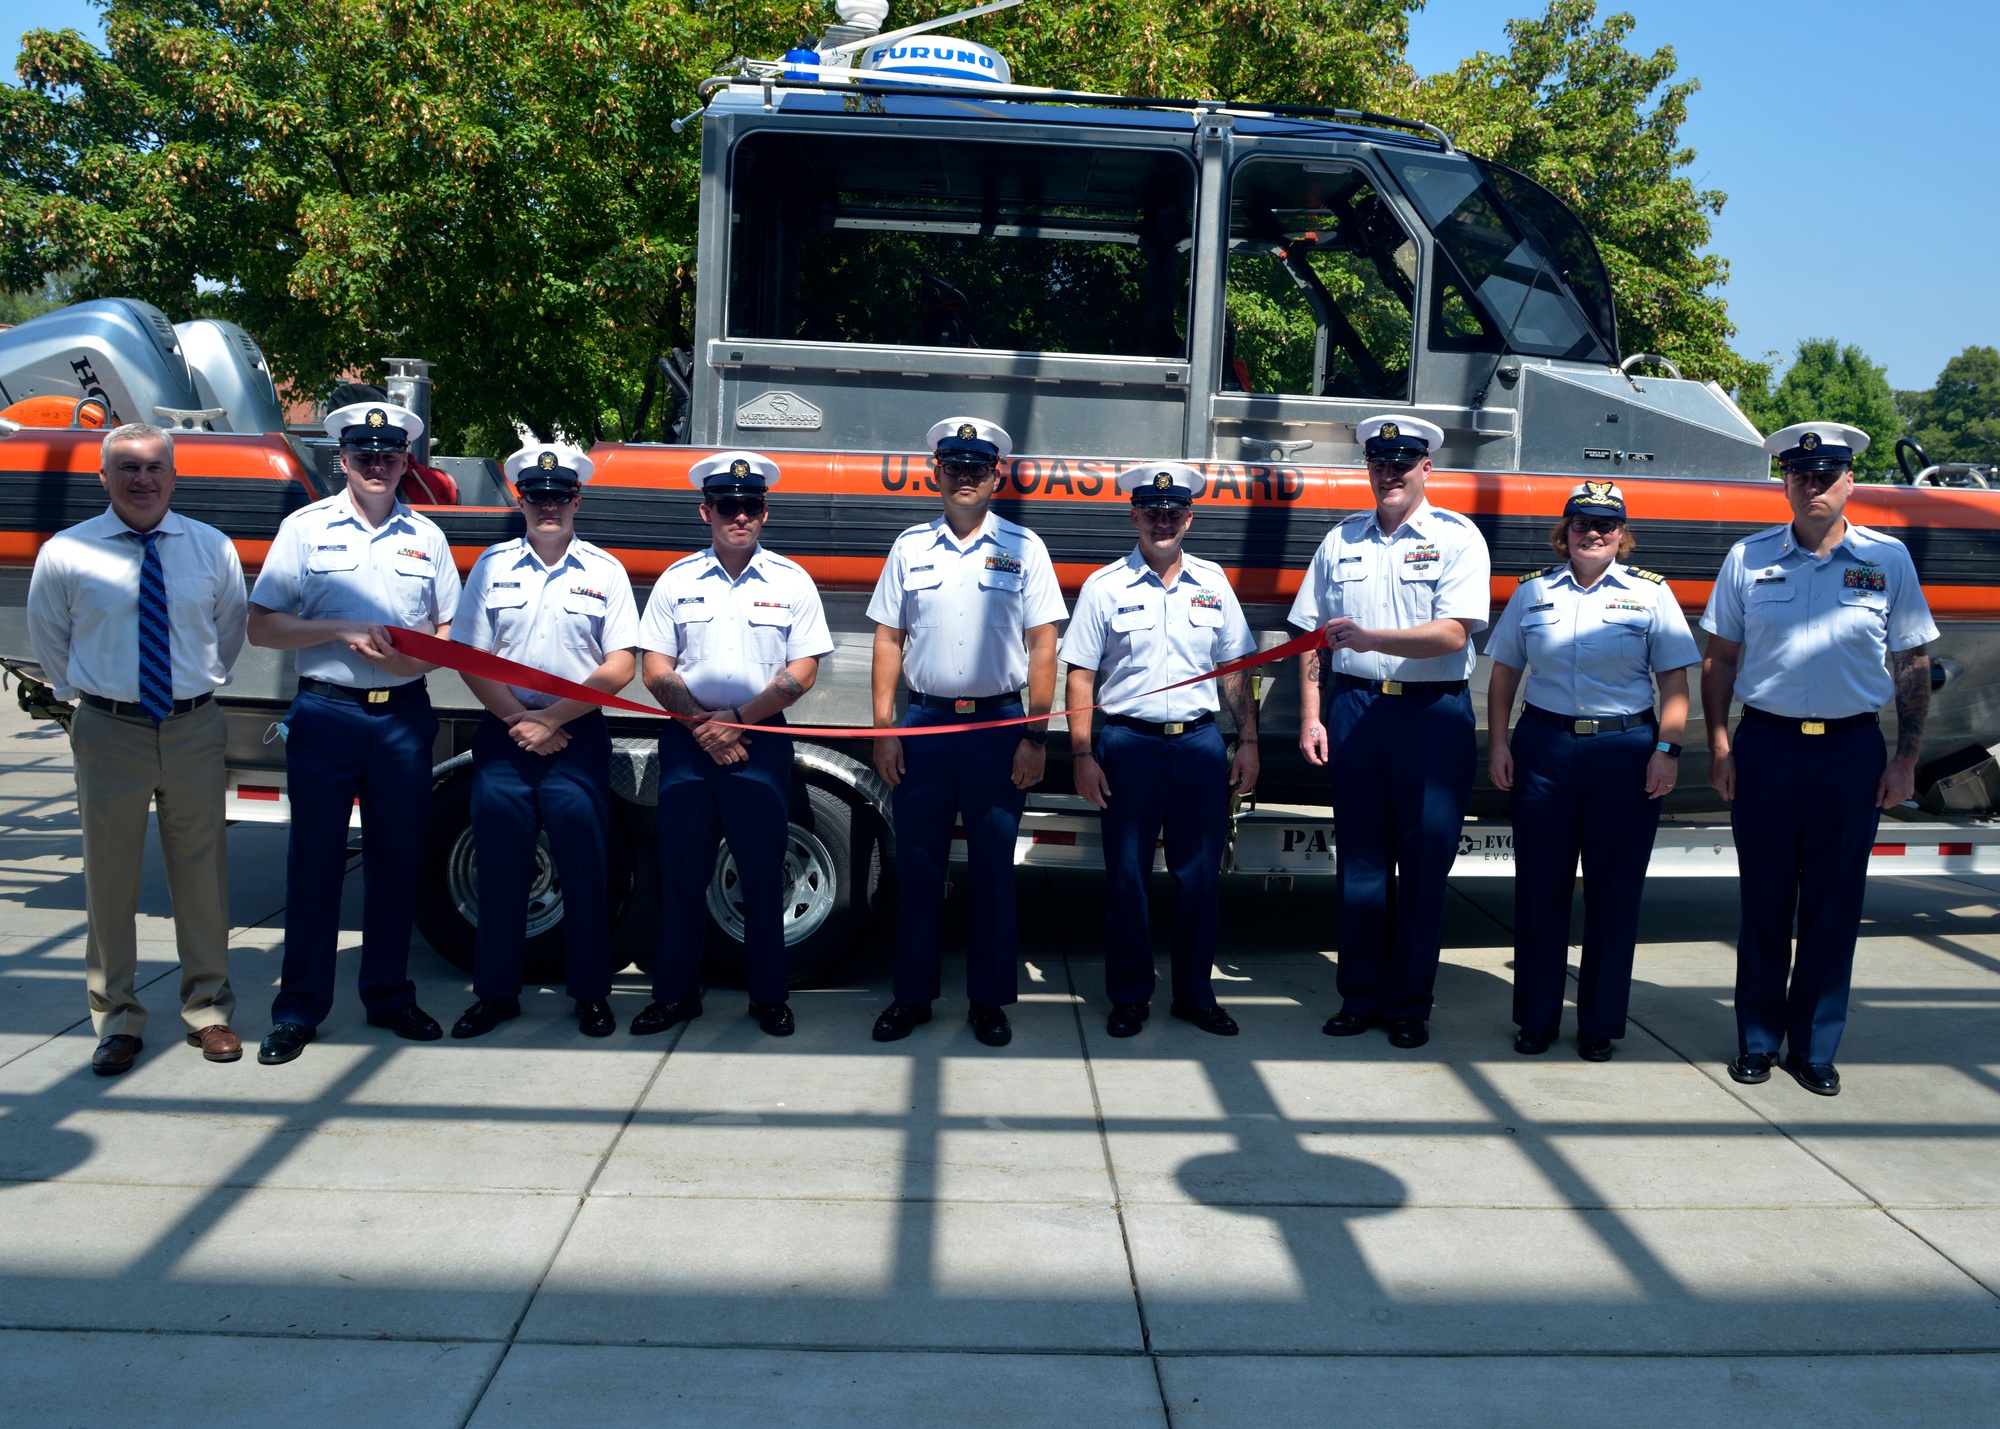 Images - Coast Guard commissions new unit in Paducah, Ky picture